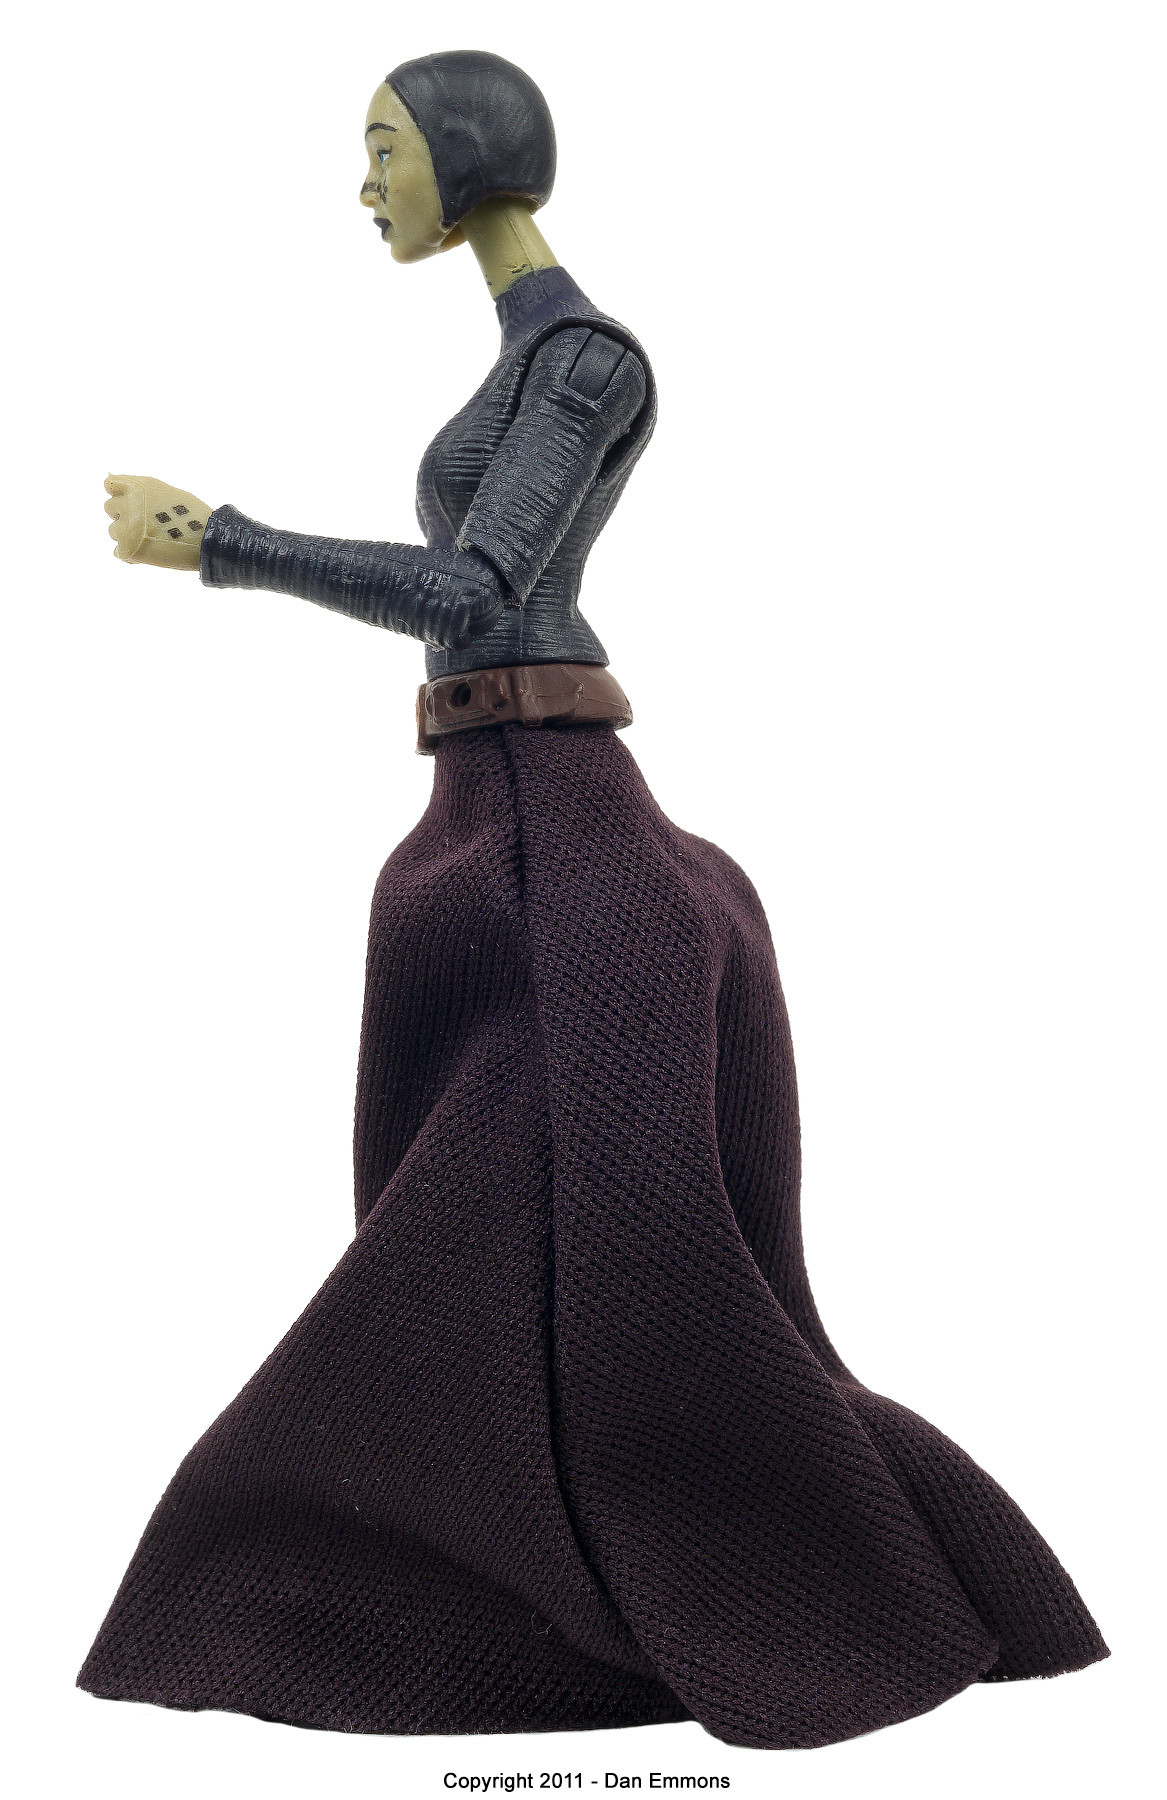 The Vintage Collection - VC51: Barriss Offee (Jedi Padawan)